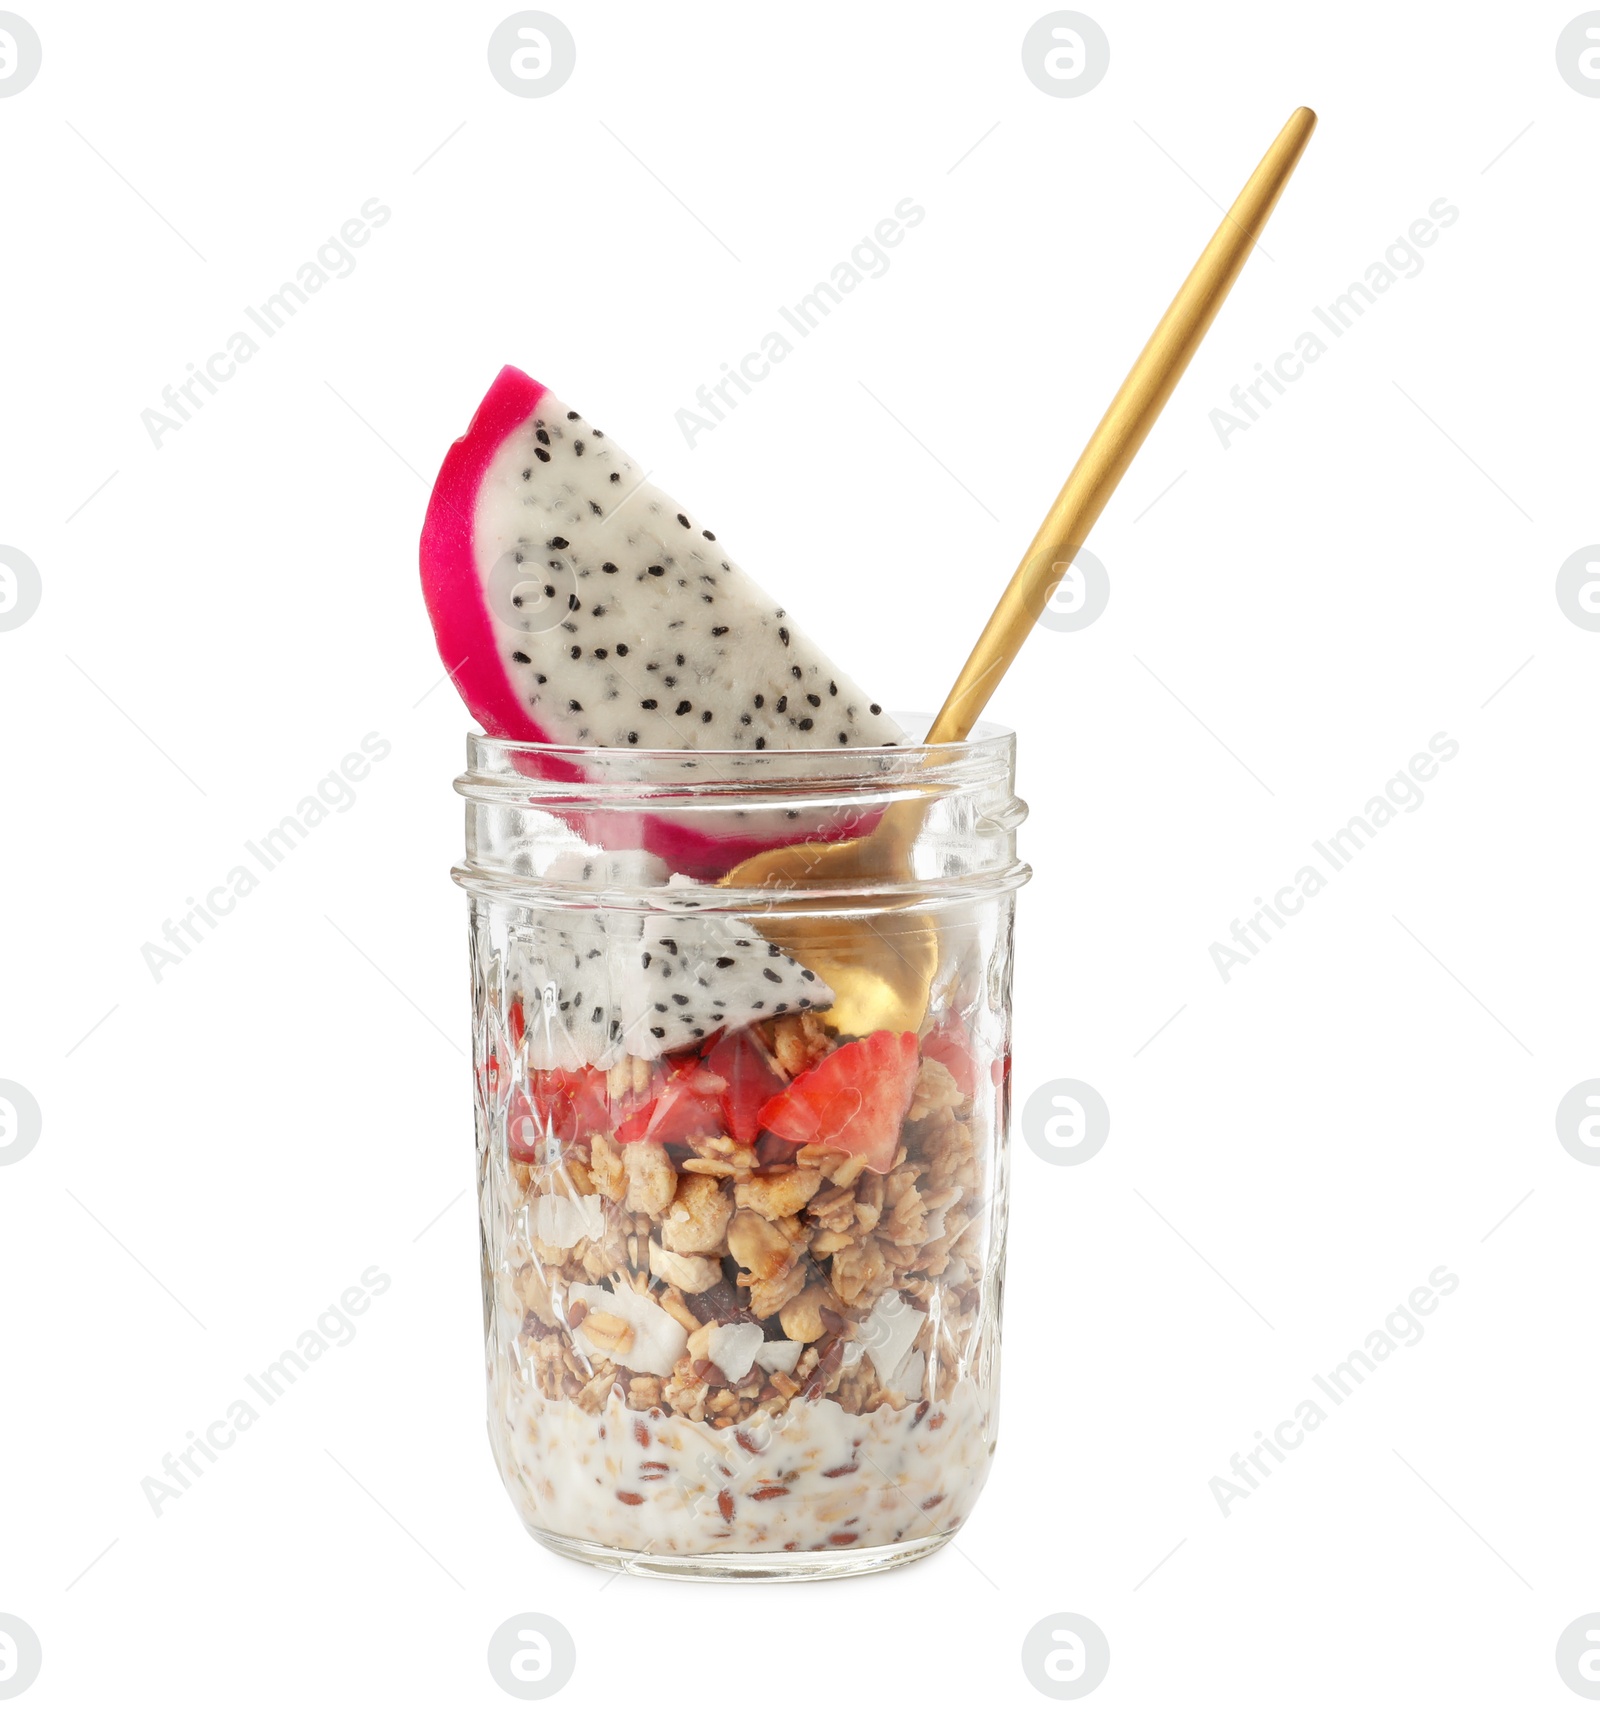 Photo of Granola with pitahaya, strawberries and spoon in glass jar on white background